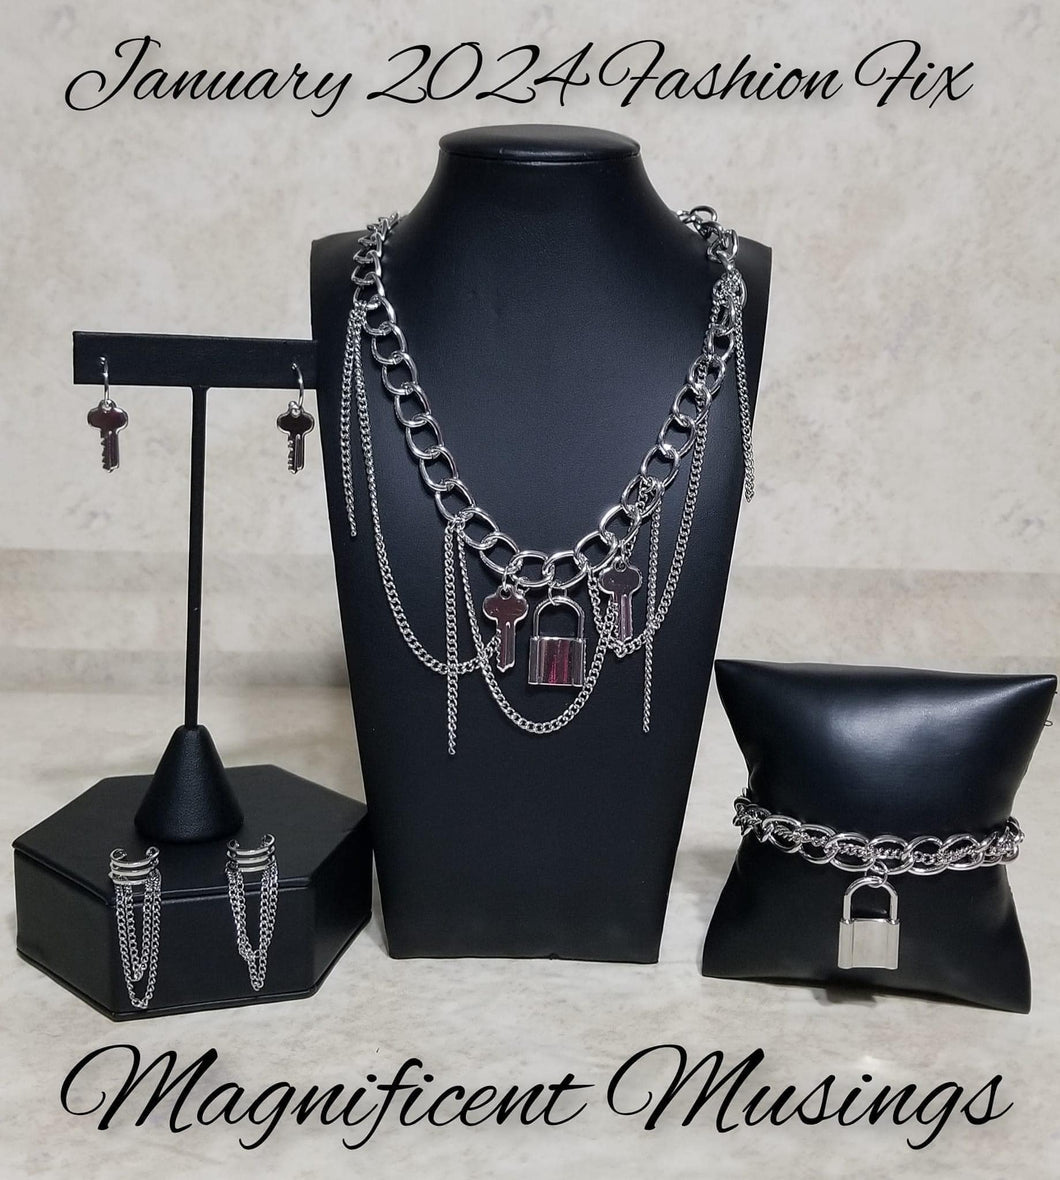 Magnificent Musings - January 2024 Fashion Fix Complete Set